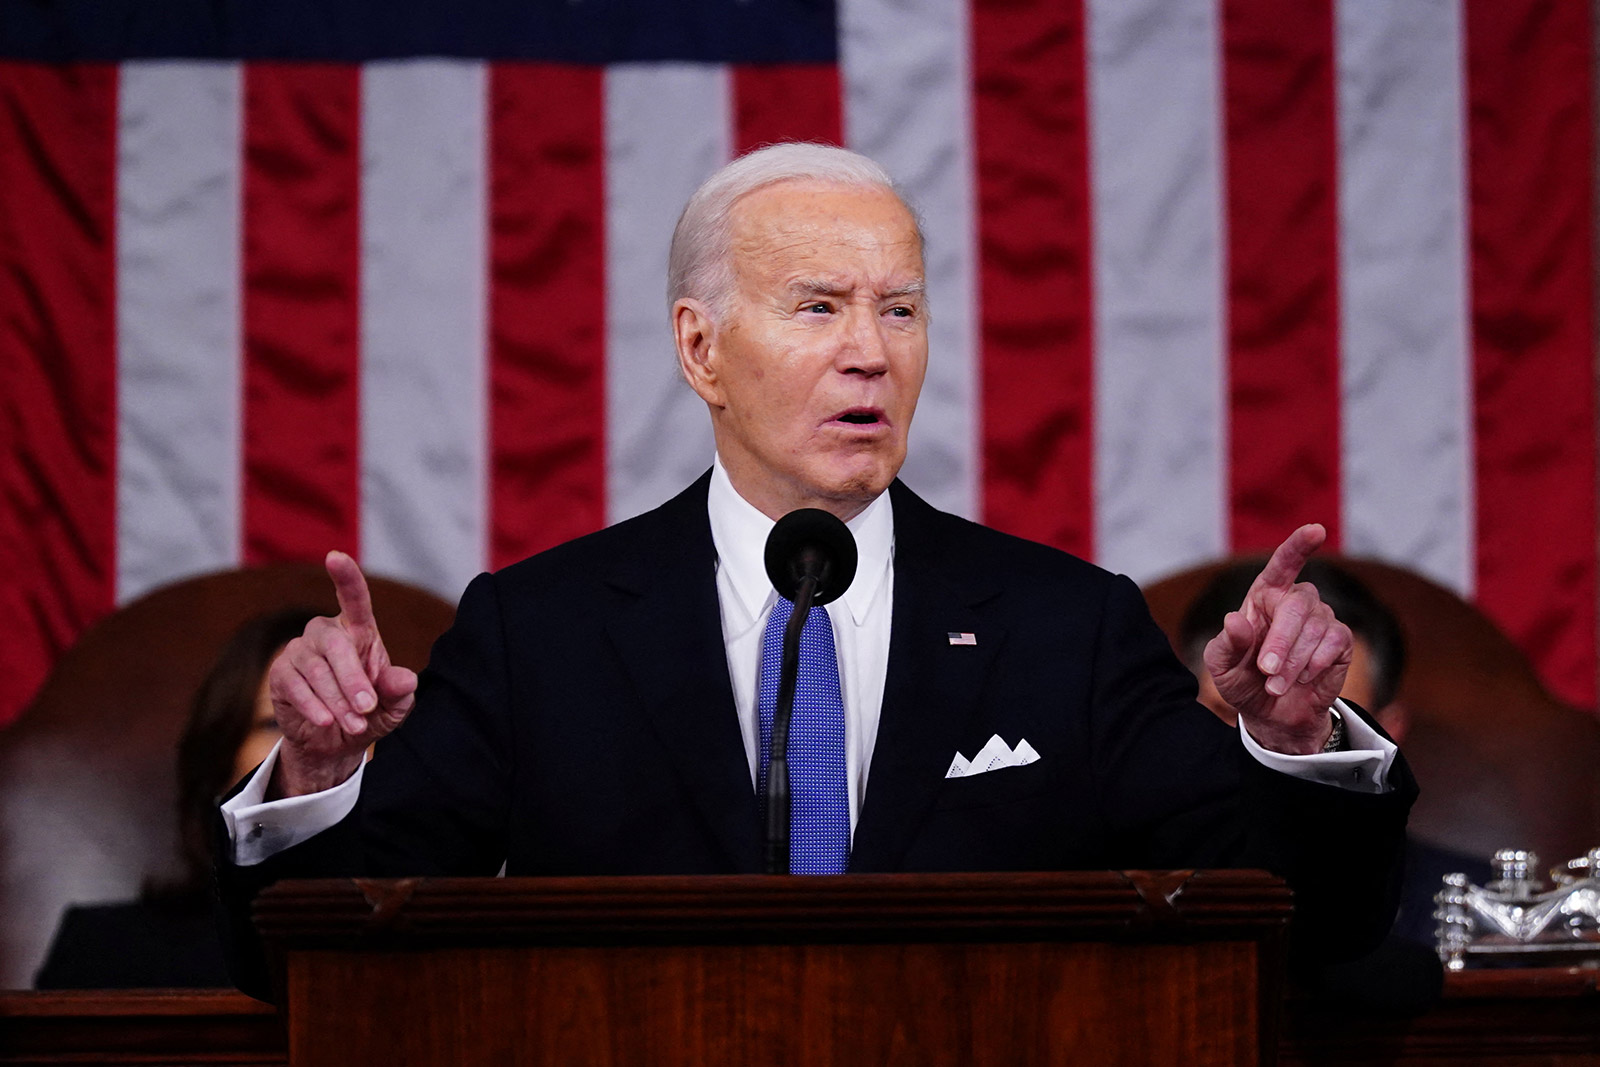 President Joe Biden delivers his third State of the Union address. Shawn Thew/Pool/Reuterrs